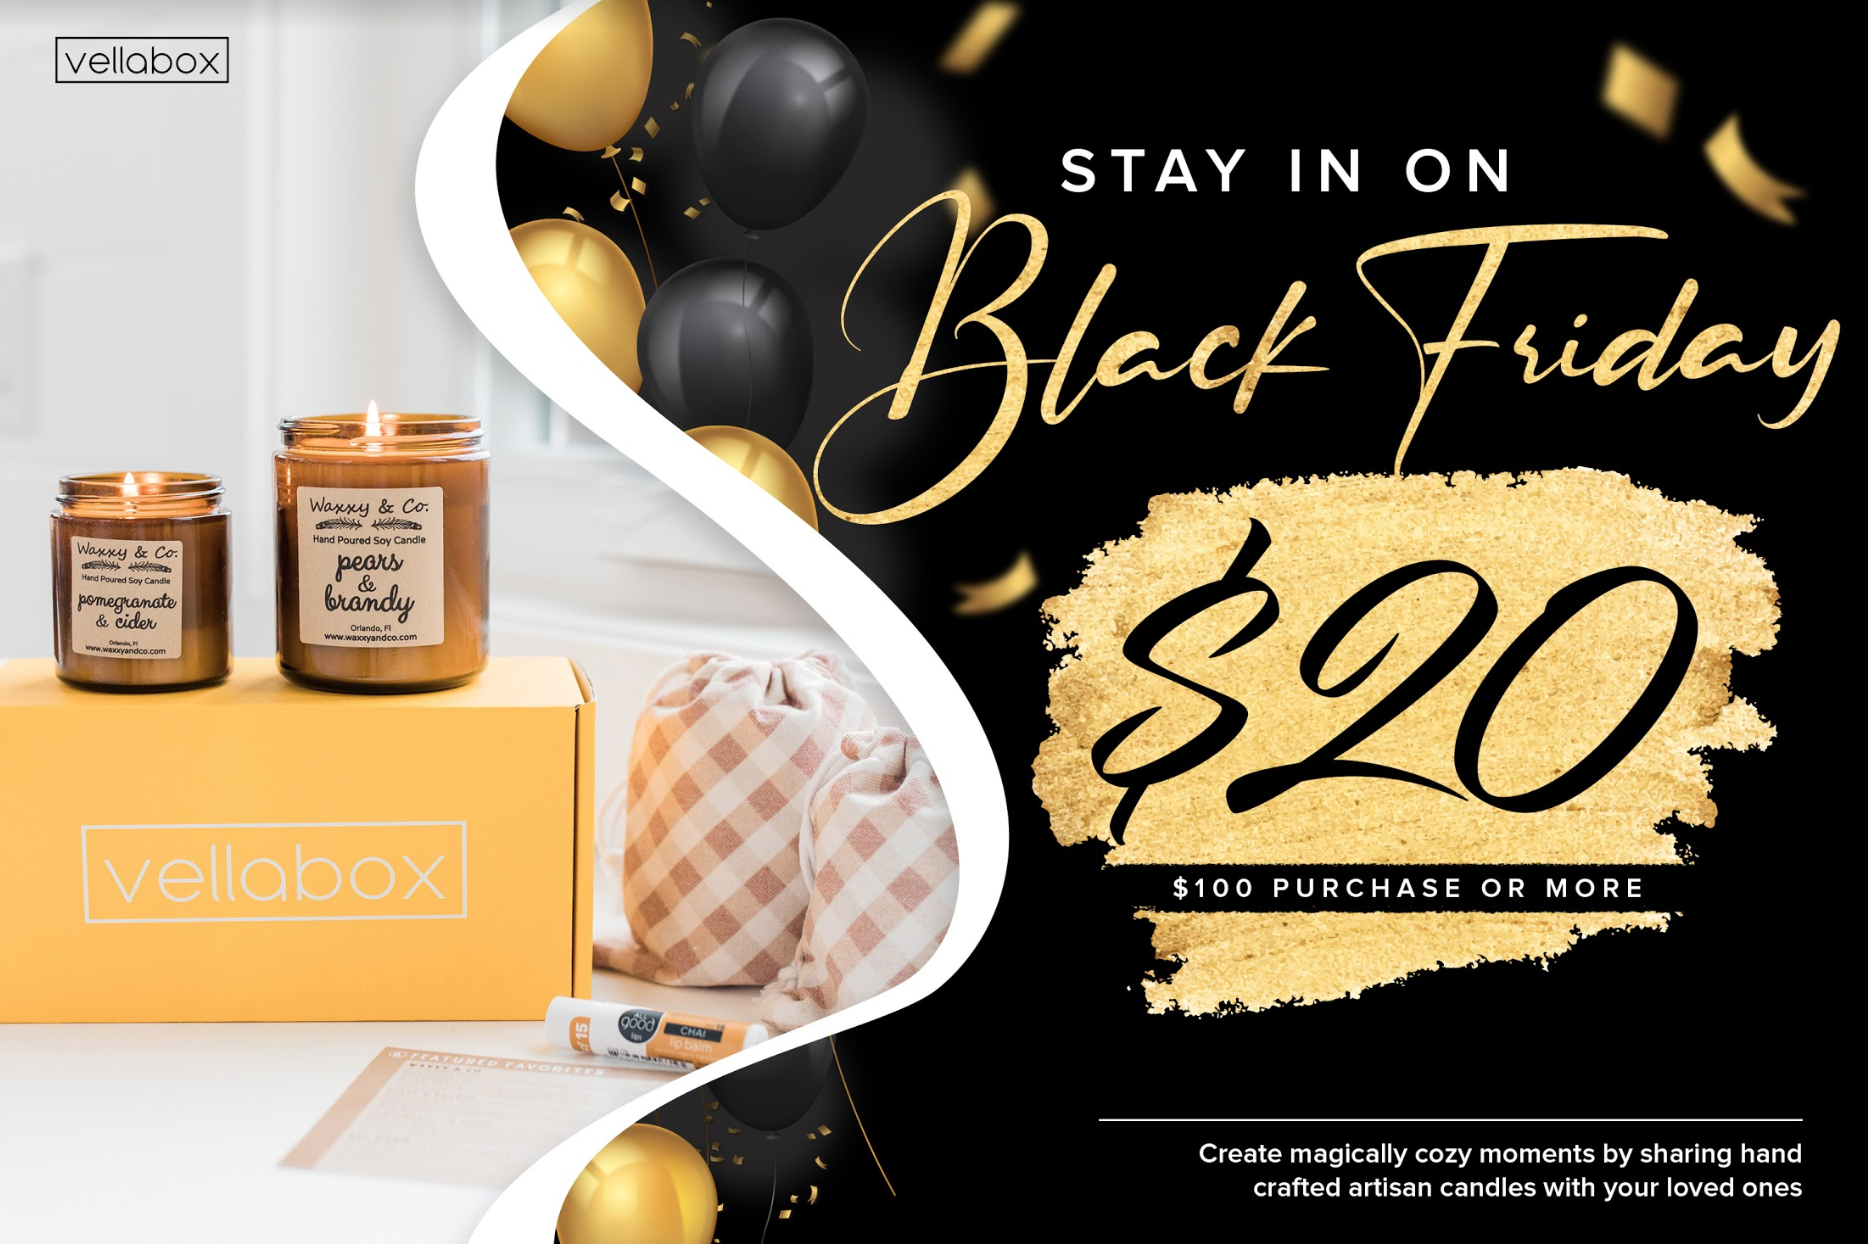 Vellabox Black Friday Coupon – $20 Off $100 Purchase!